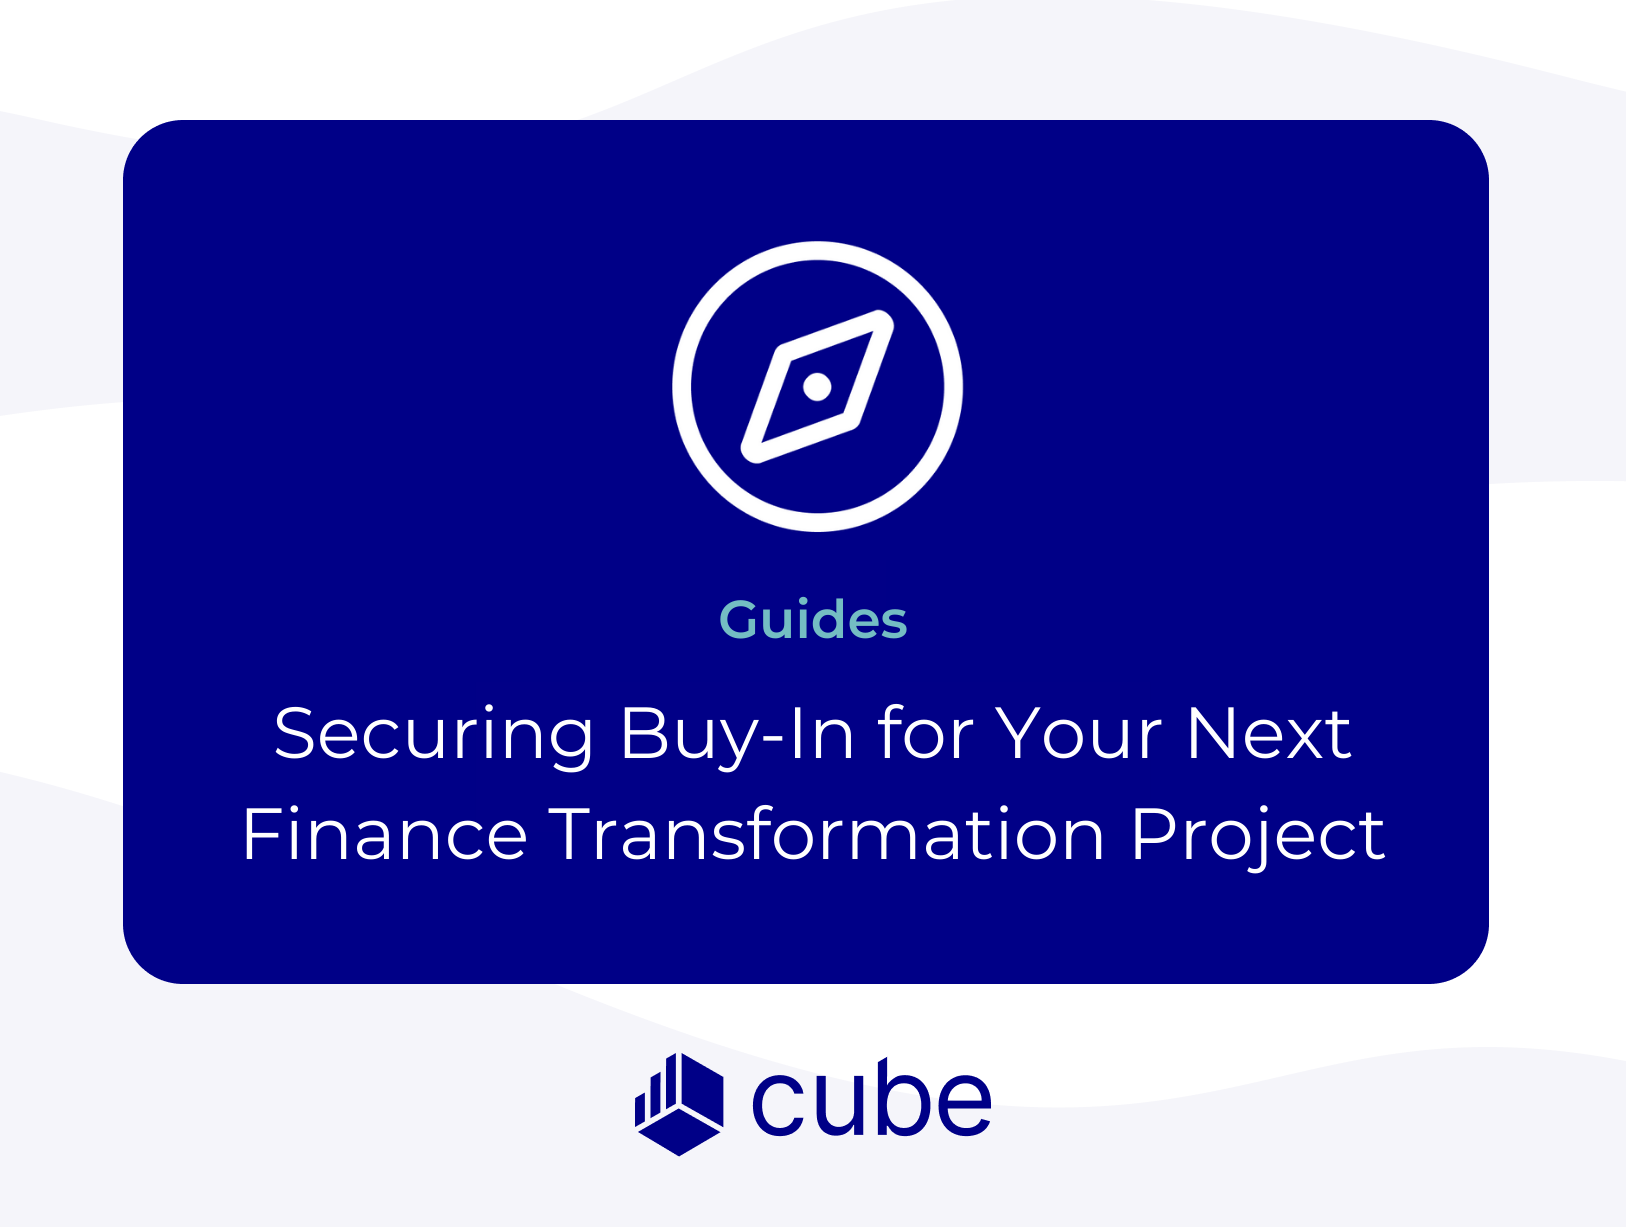 Getting Buy-In for Your Next Finance Transformation Project